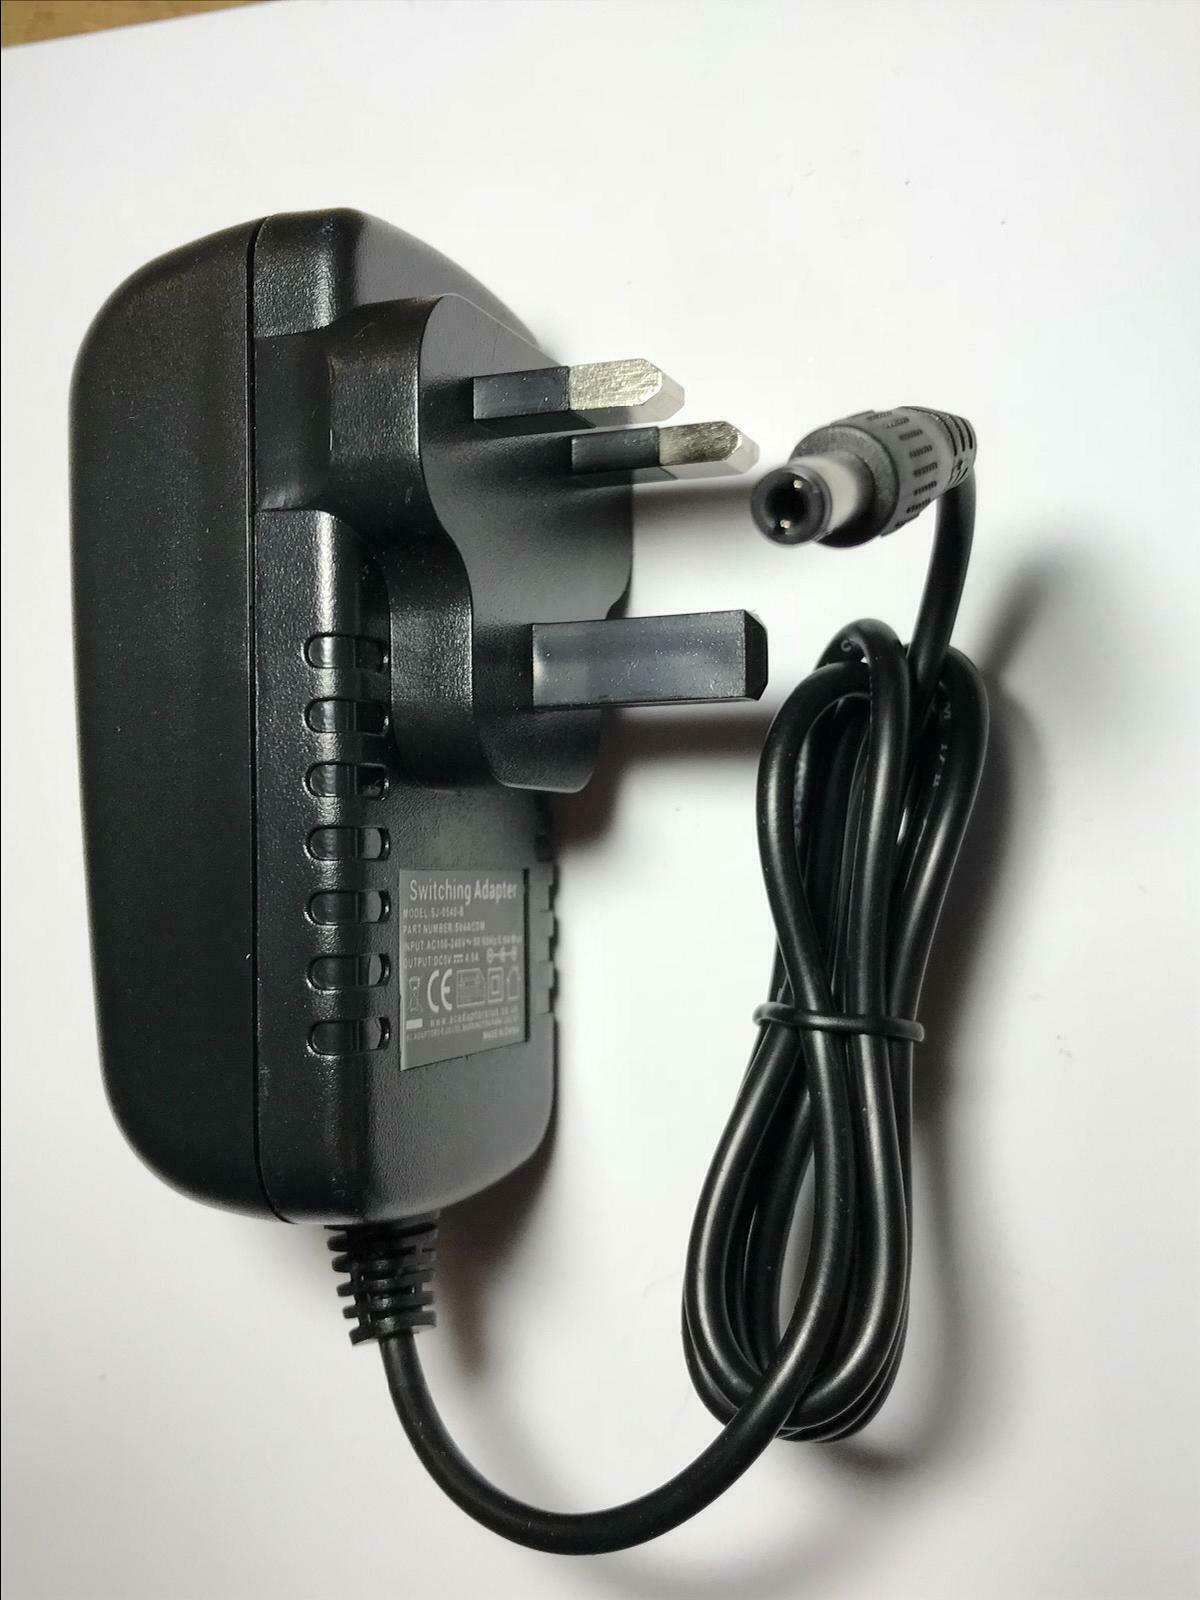 Remplacement pour 5 V 3.0 A Pioneer Switching Power Supply 411-S1-879 HK-AJ-050A300 Type: Power Adapter Max. Output